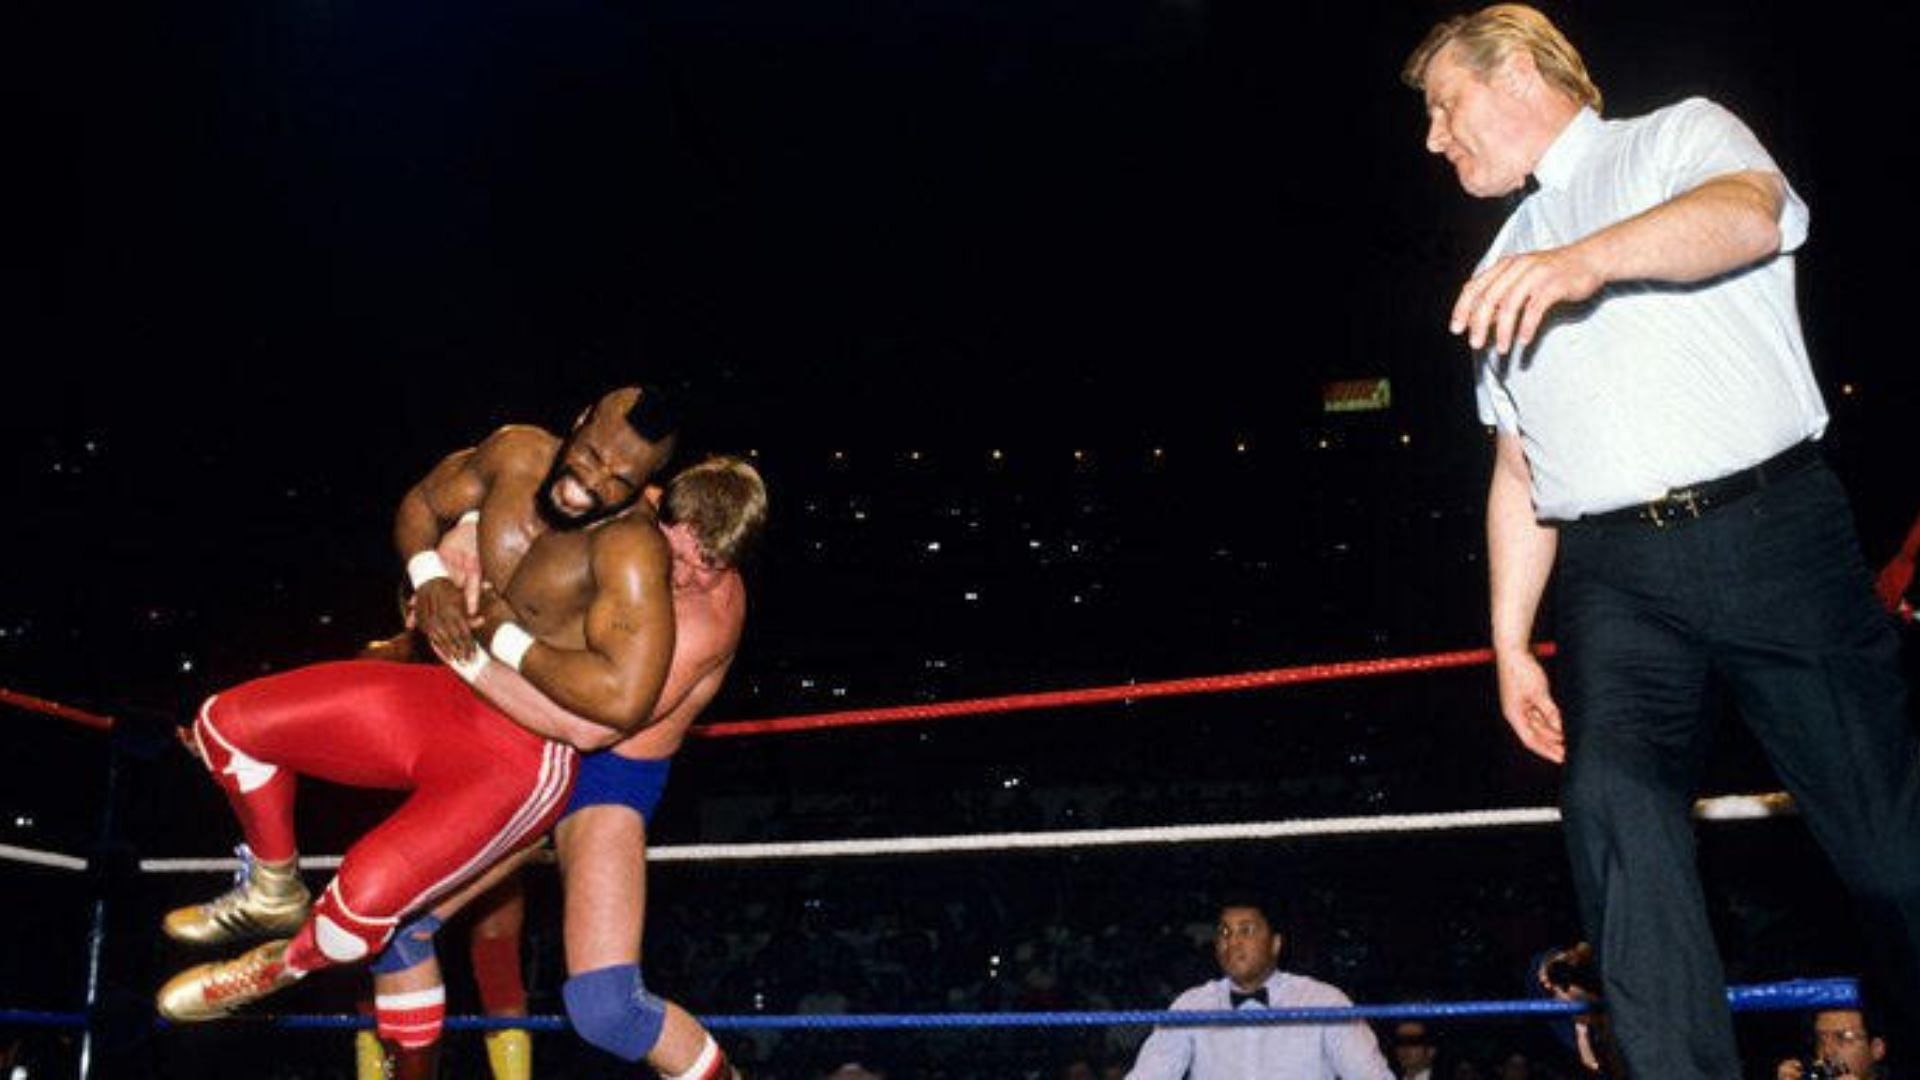 WWE WrestleMania 1 Main Event on March 31, 1985